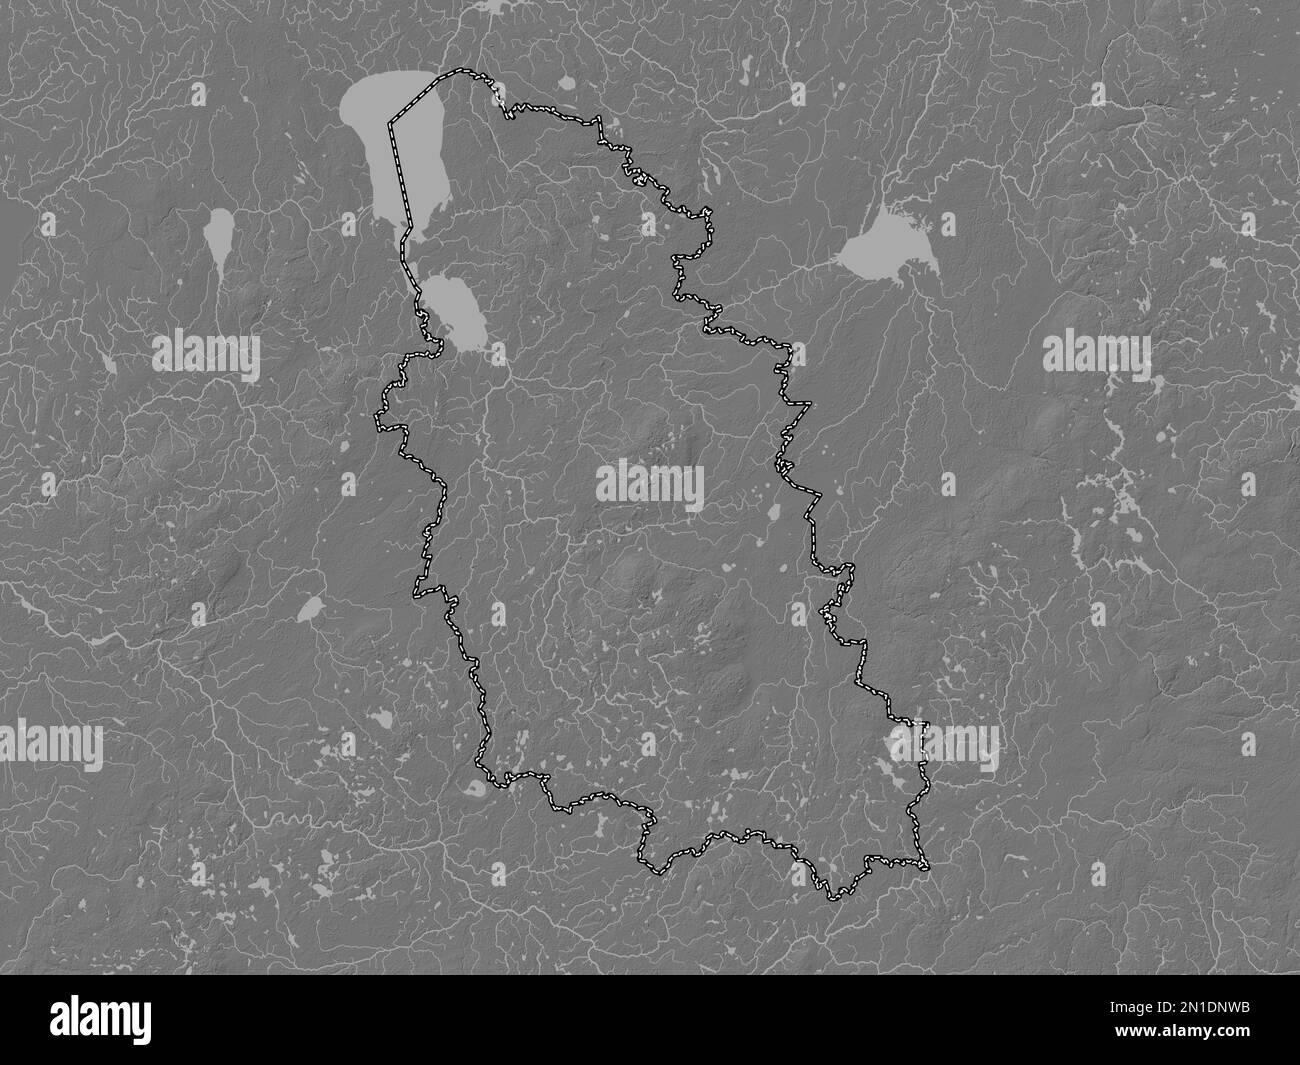 Pskov, region of Russia. Bilevel elevation map with lakes and rivers Stock Photo